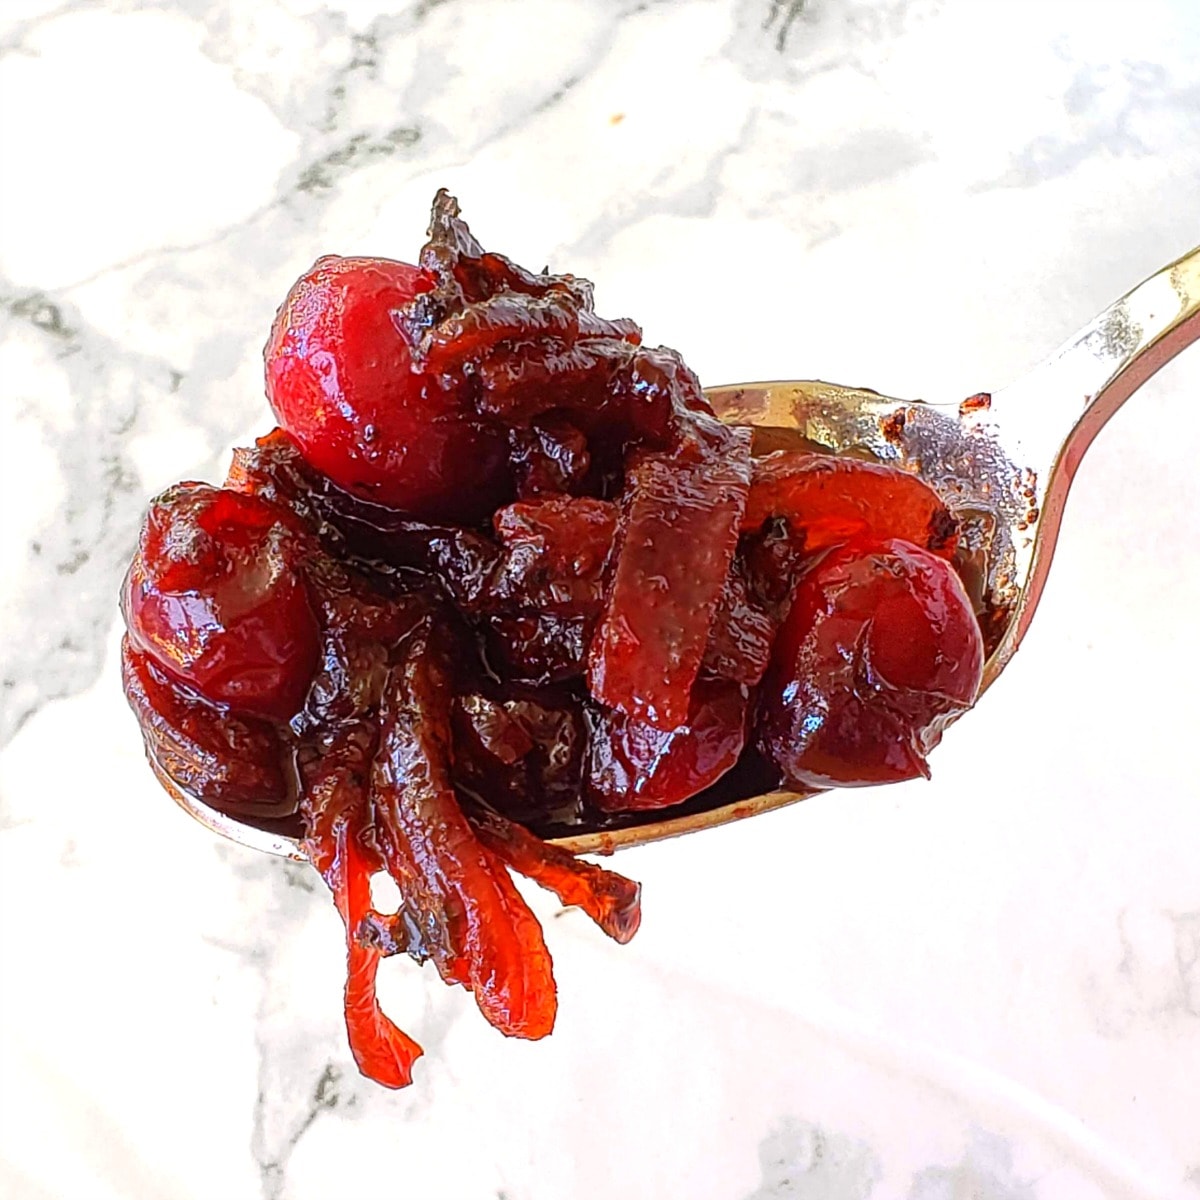 Cranberry Sauce with Caramelized Onions is the best of both worlds -- a lightly sweet, deeply savory, full-bodied sauce that complements turkey or any roasted meat. It's easy, with only 5 ingredients.